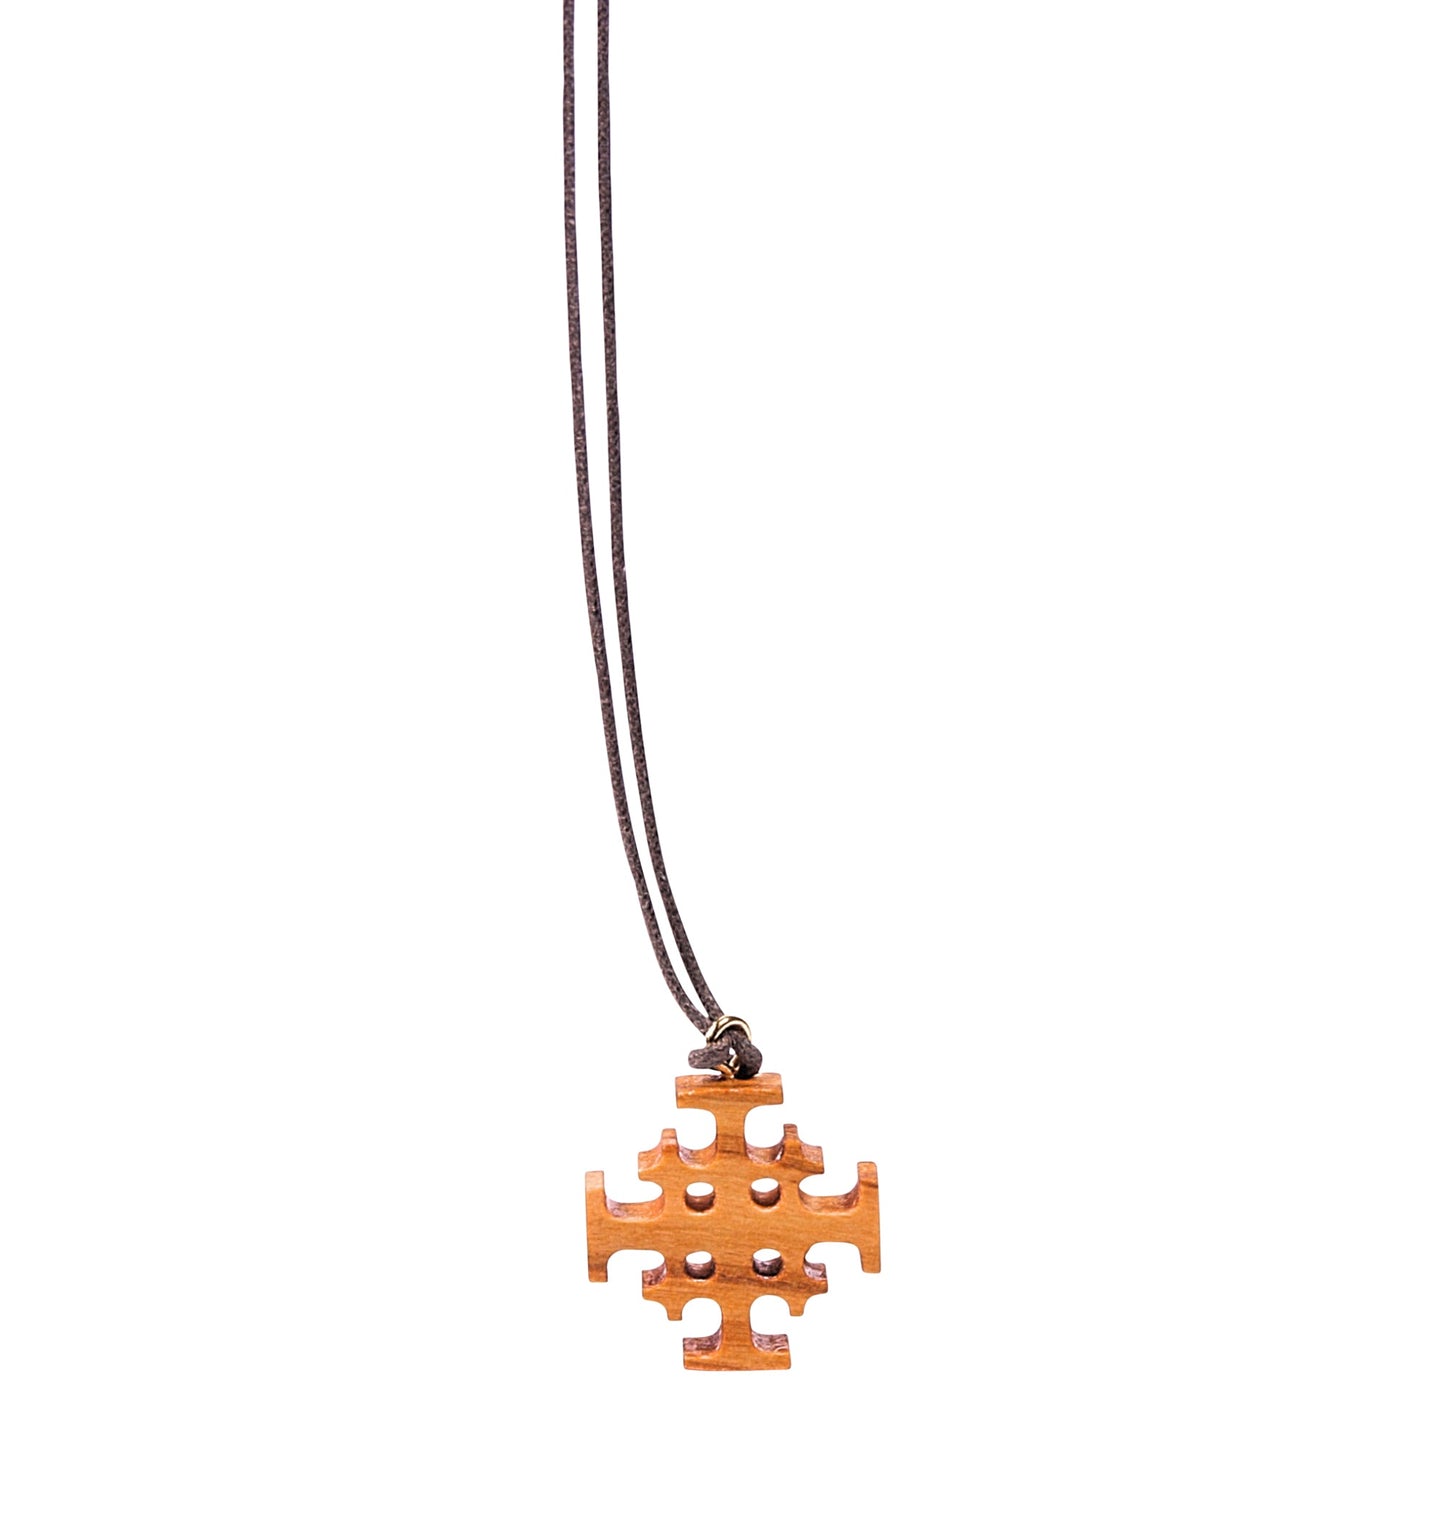 Olive wood Jerusalem cross pendant on a soft cotton cord, featuring a central cross potent surrounded by four smaller Greek crosses.